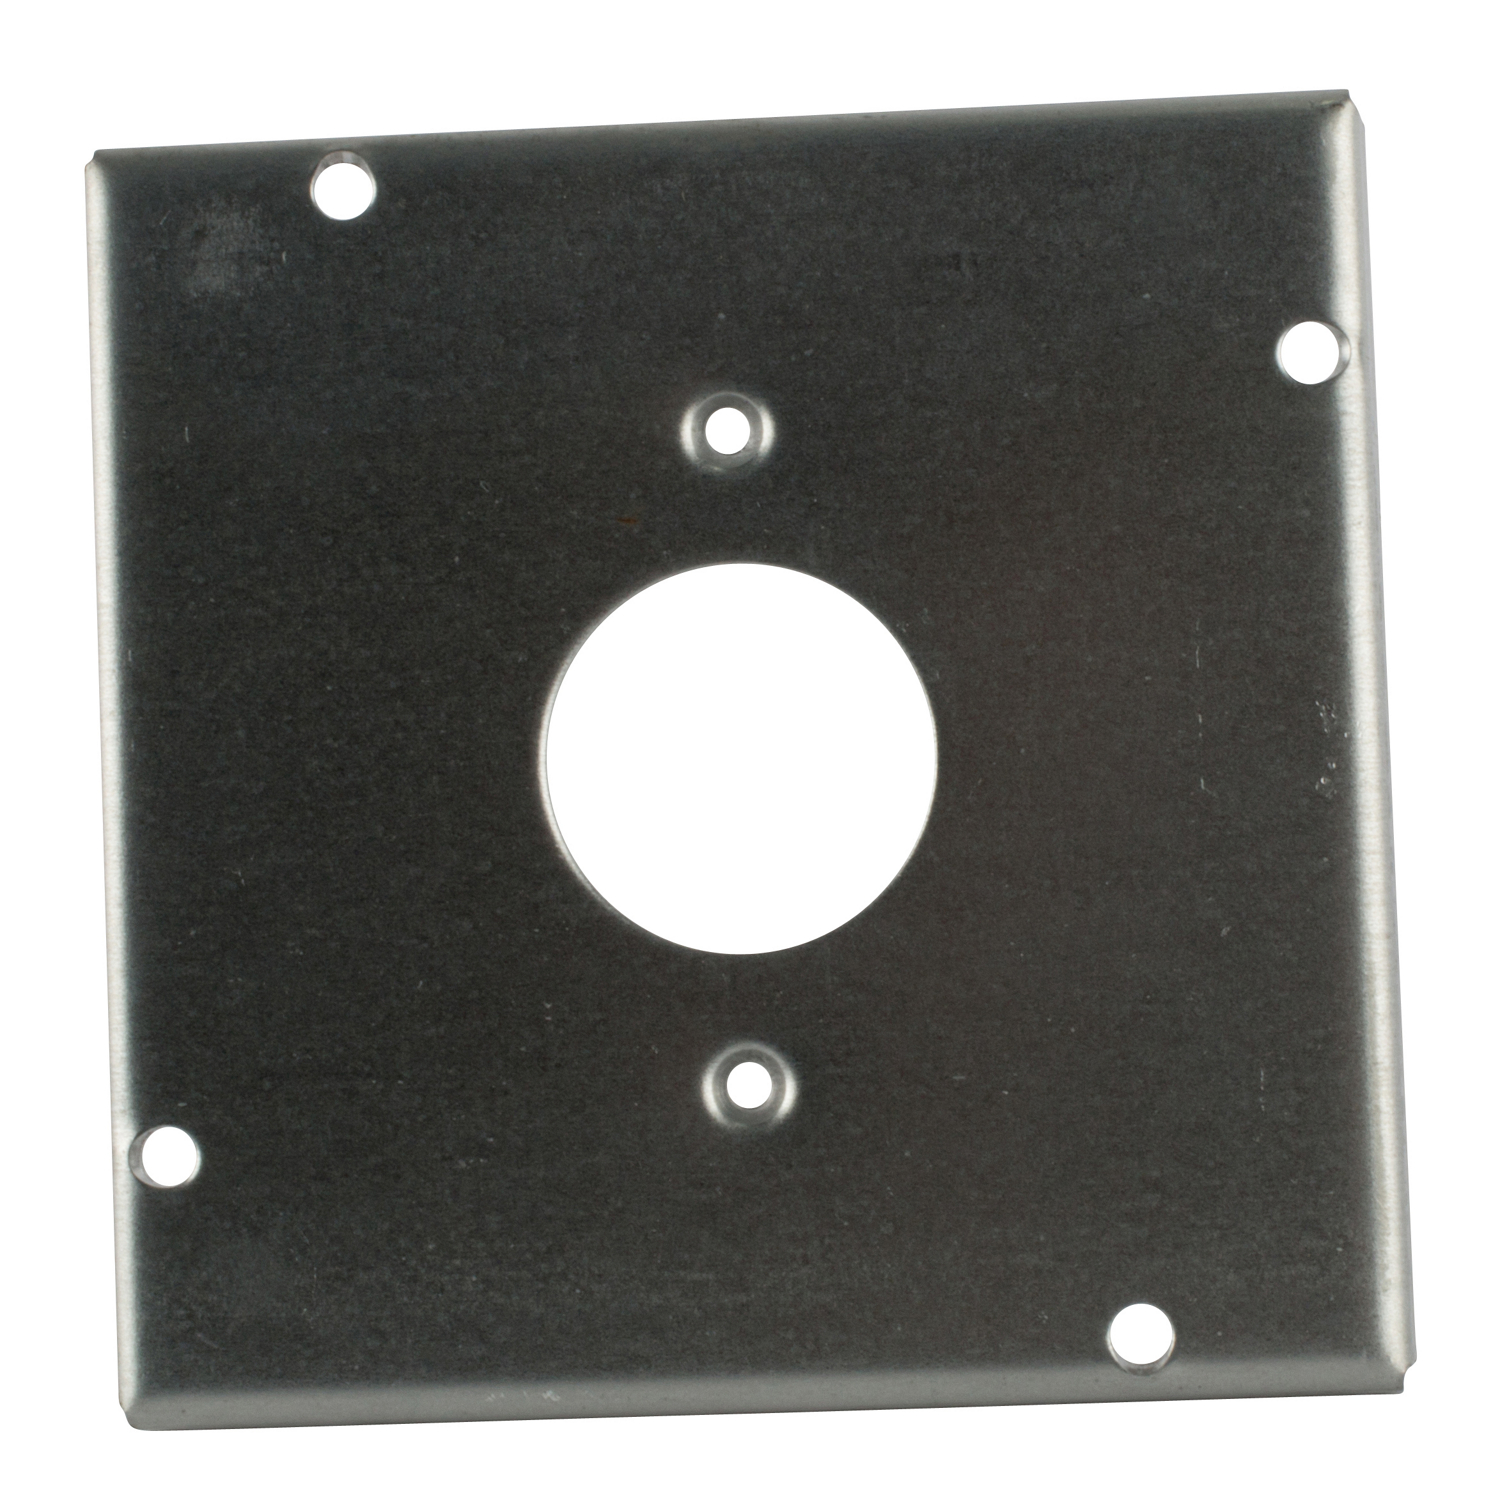 RSL-11 Square Box Surface Cover Steel City;ABB - Installation Products